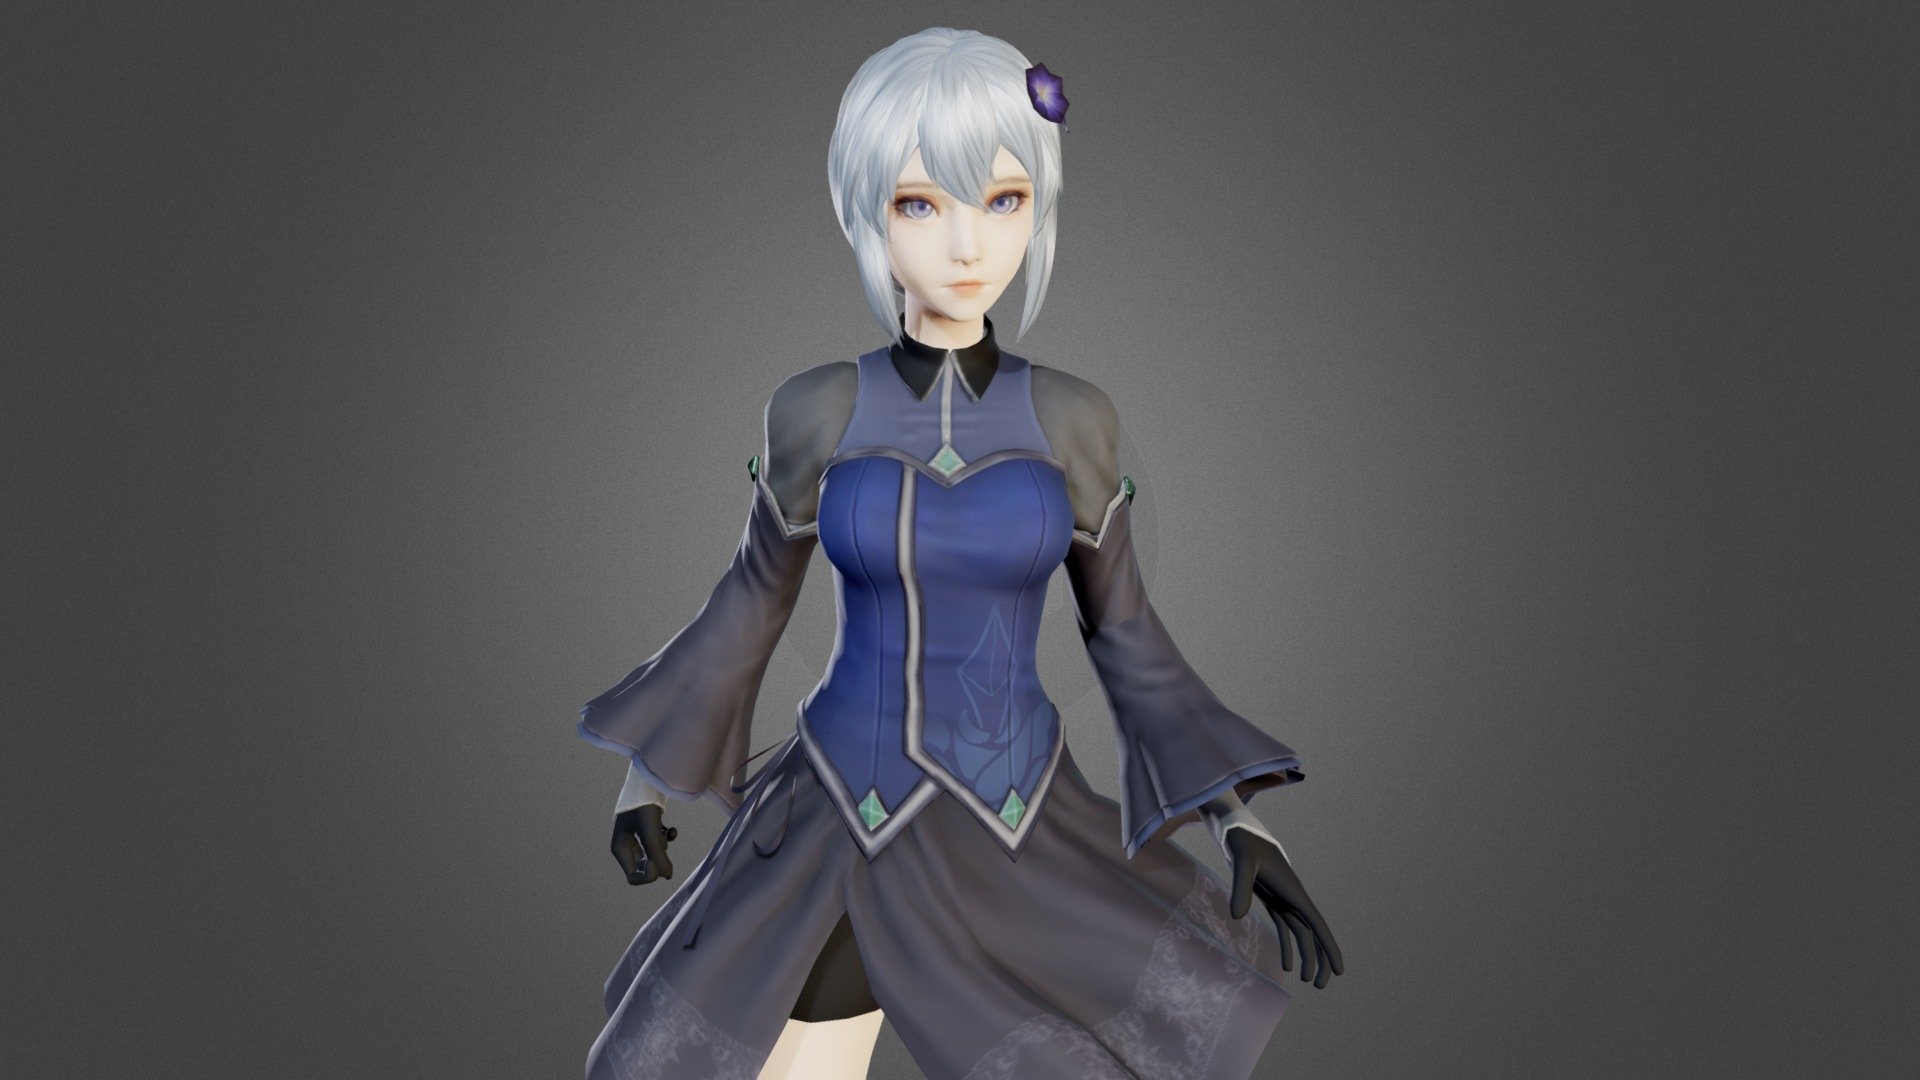 Character model for UMN VGDC Spring 2022 game project, Argent: Hidden Crown. Free for personal use.
Original character concept by maocha20 on Instagram 3d model